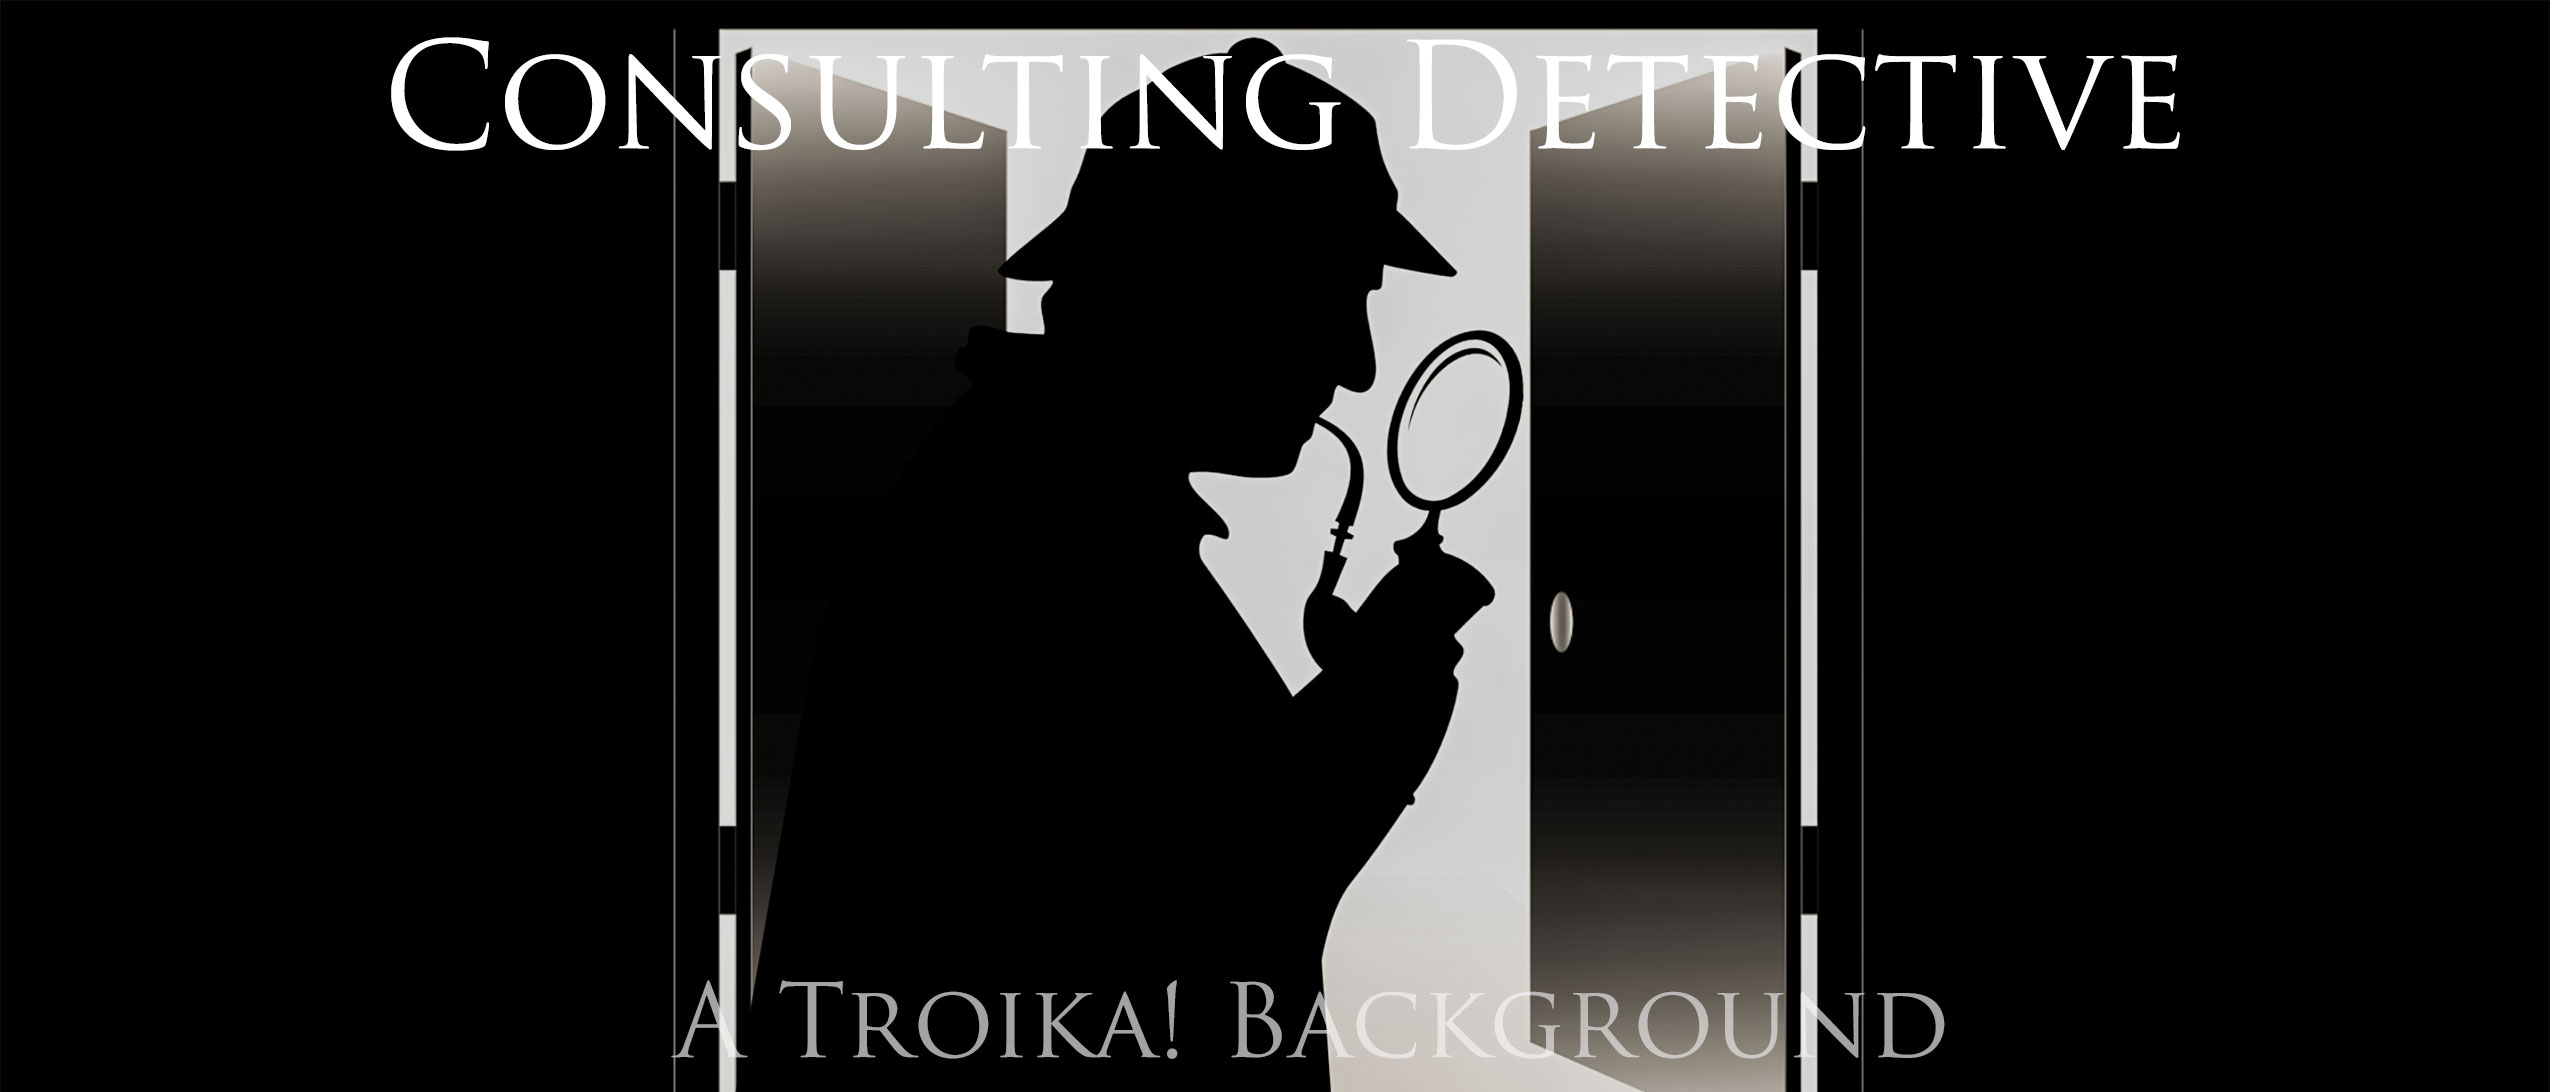 Consulting Detective - A Troika! Background